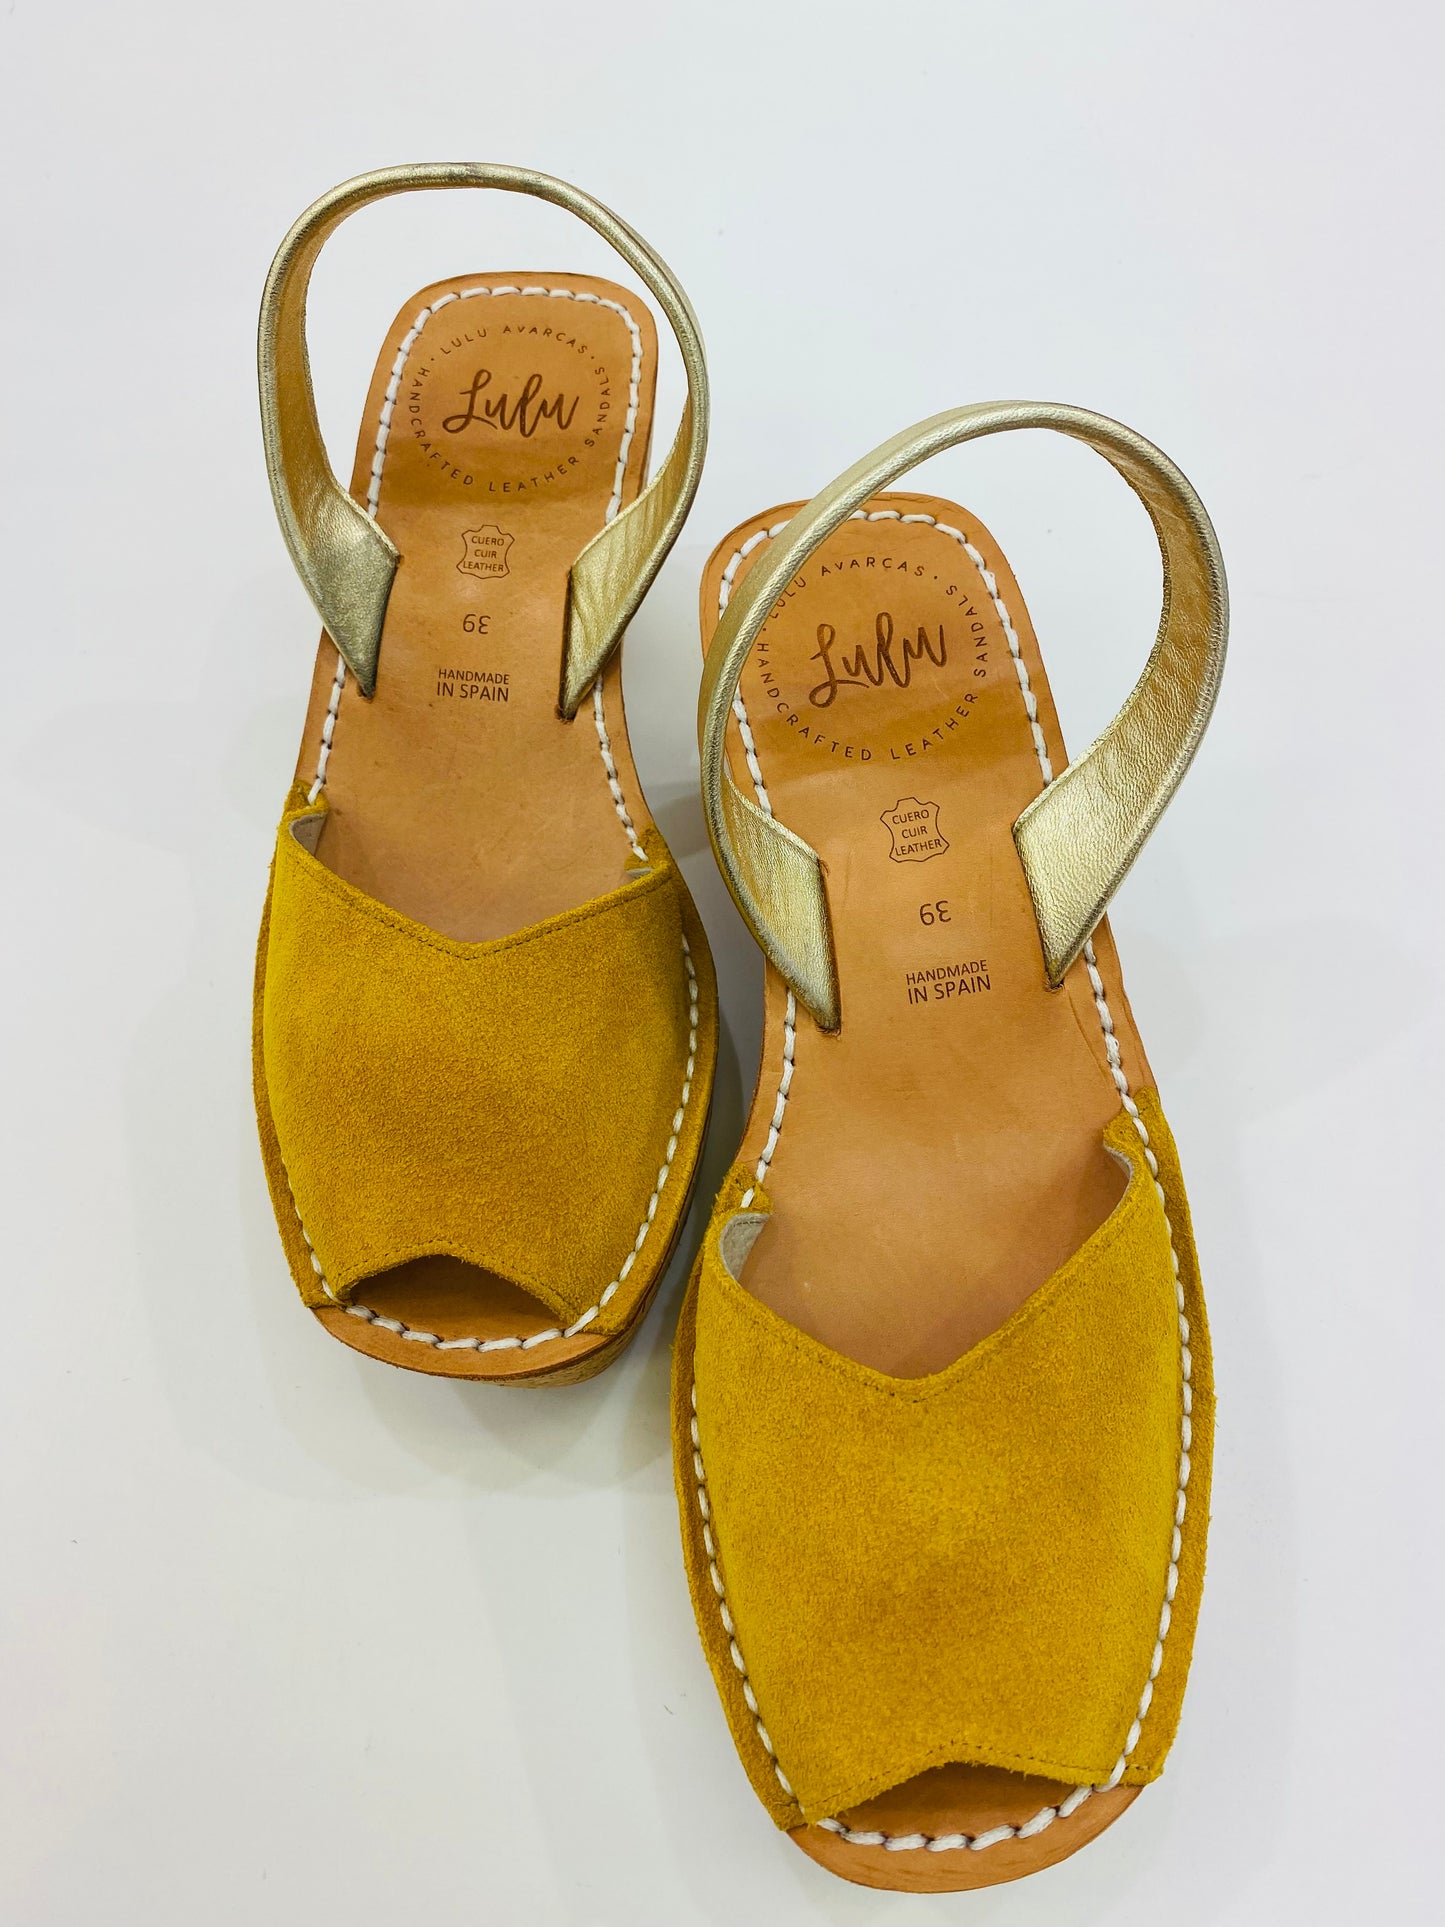 LULU AVARCAS LEATHER CORKS IN MUSTARD WITH GOLD STRAP